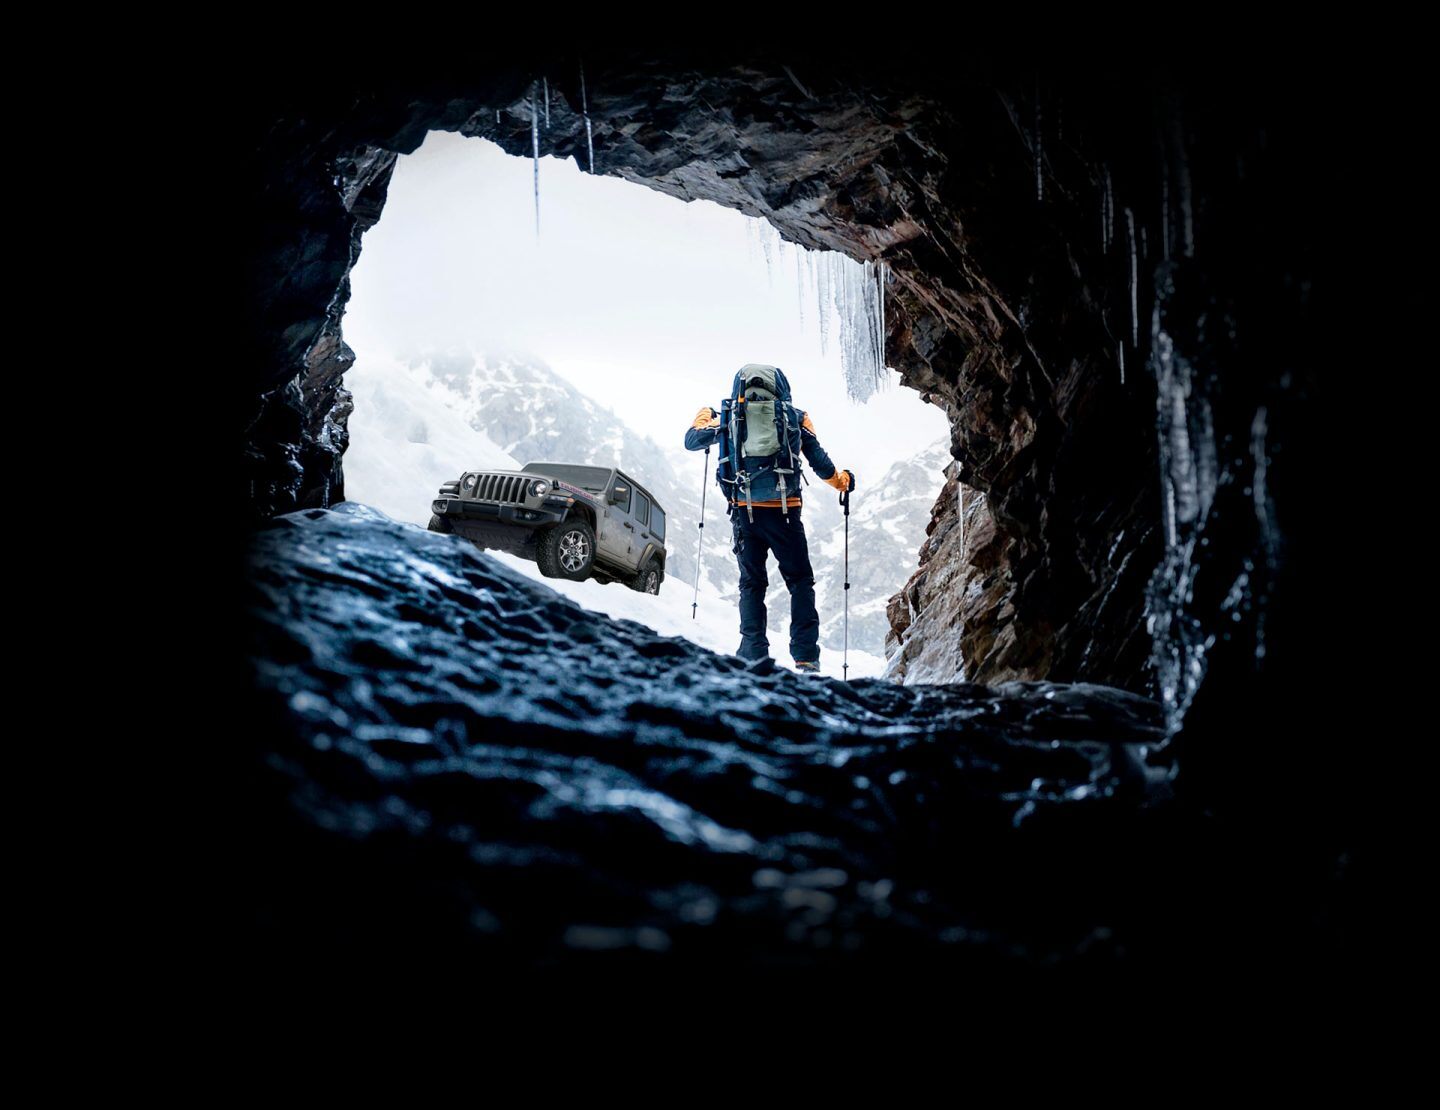 A bundled-up hiker with walking poles approaches a 2022 Jeep Wrangler Rubicon parked on a snowy mountainside beside an ice cave.